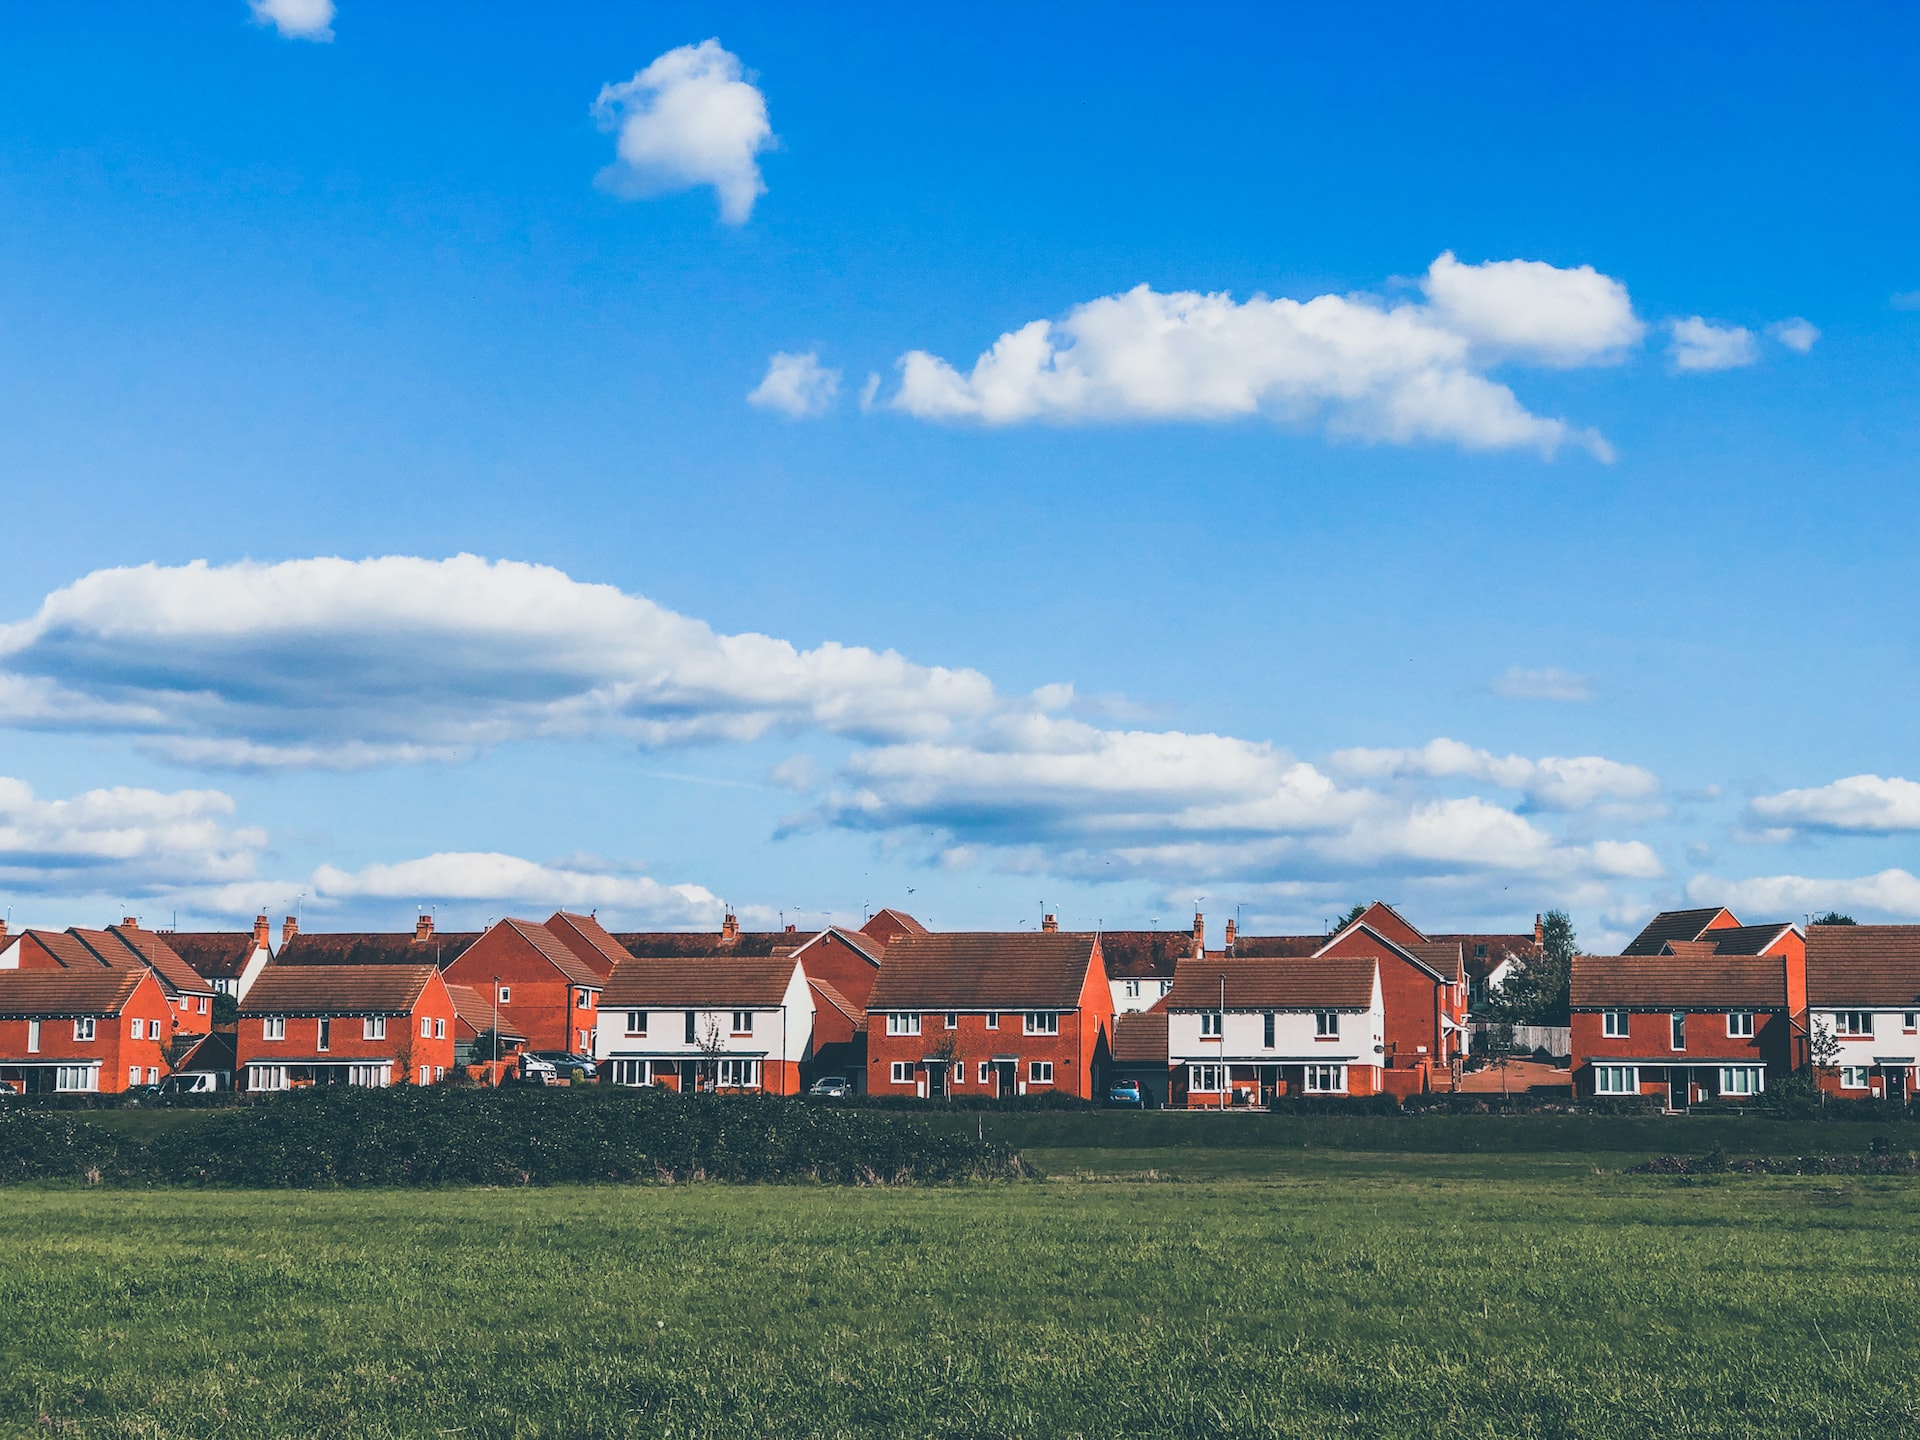 A photograph of a housing estate viewed from across a green field with a blue sky above 